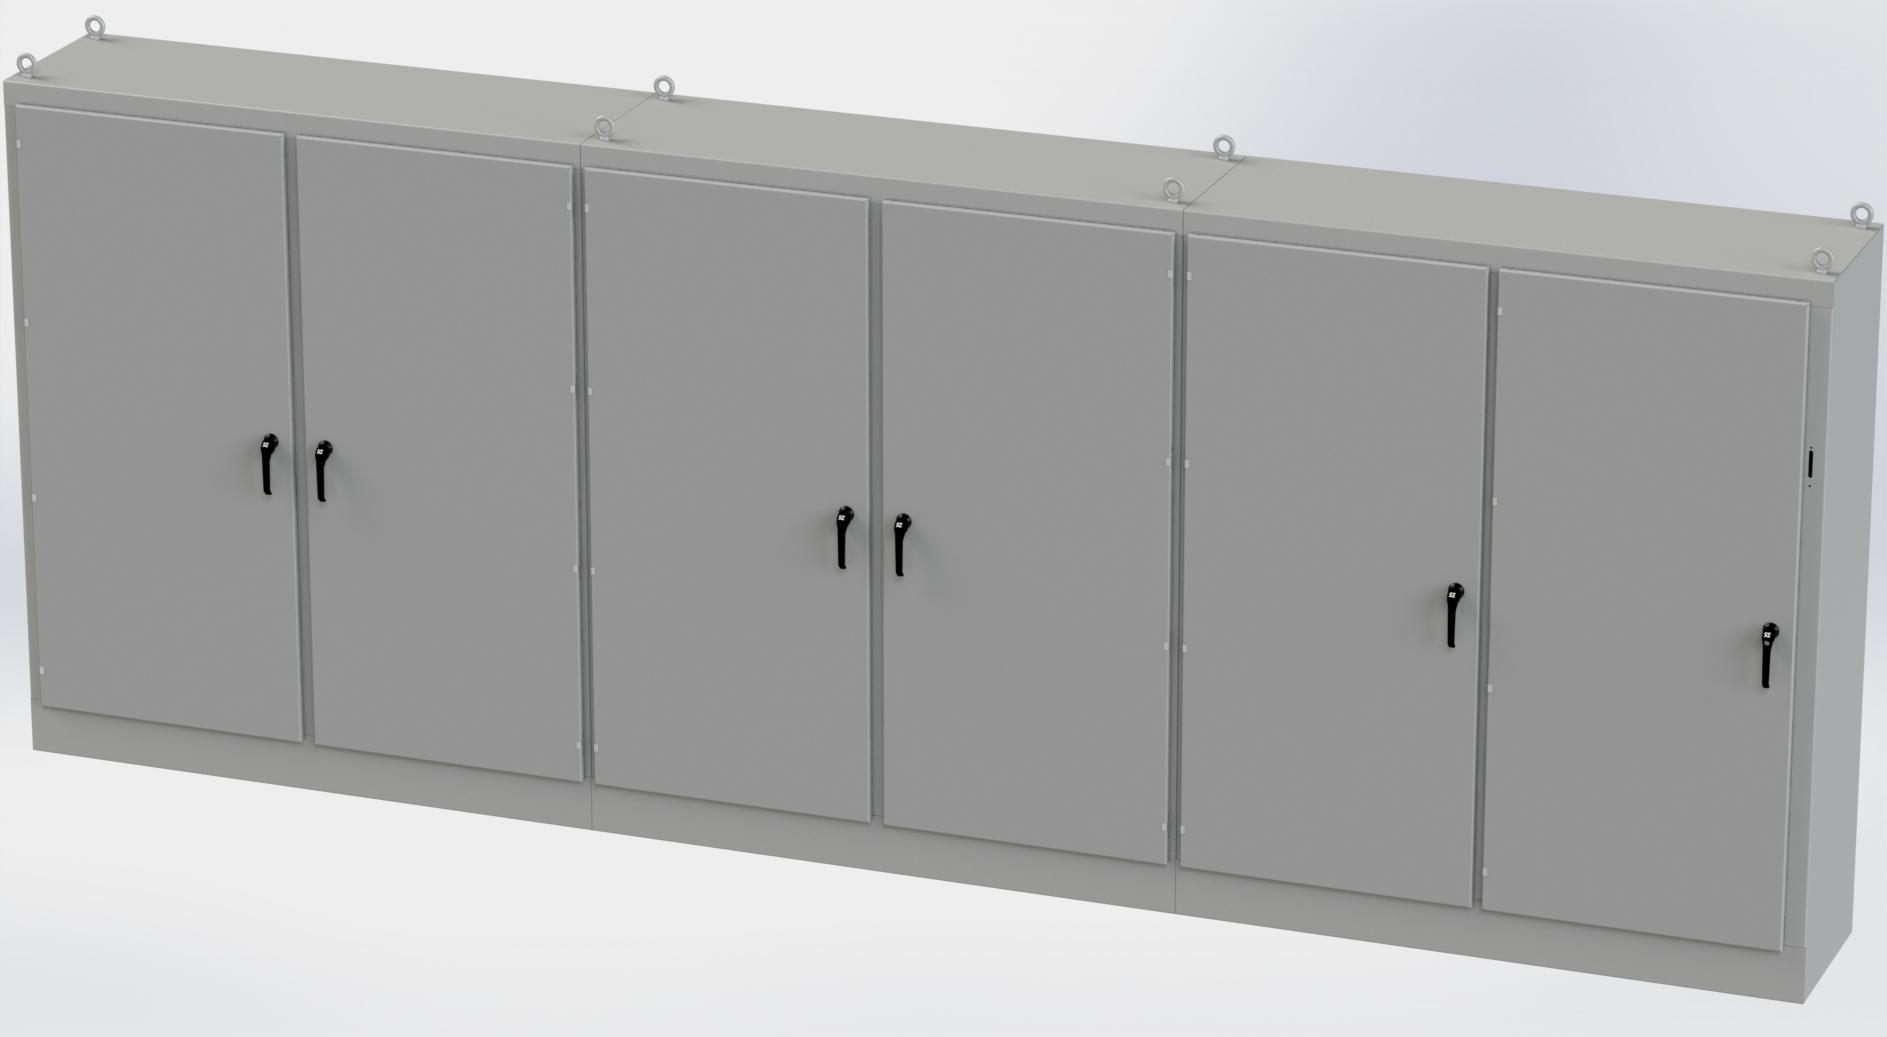 Saginaw Control SCE-90XM6EW24G 6DR XM Enclosure, Height:90.00", Width:235.00", Depth:24.00", ANSI-61 gray powder coating inside and out. Sub-panels are powder coated white.